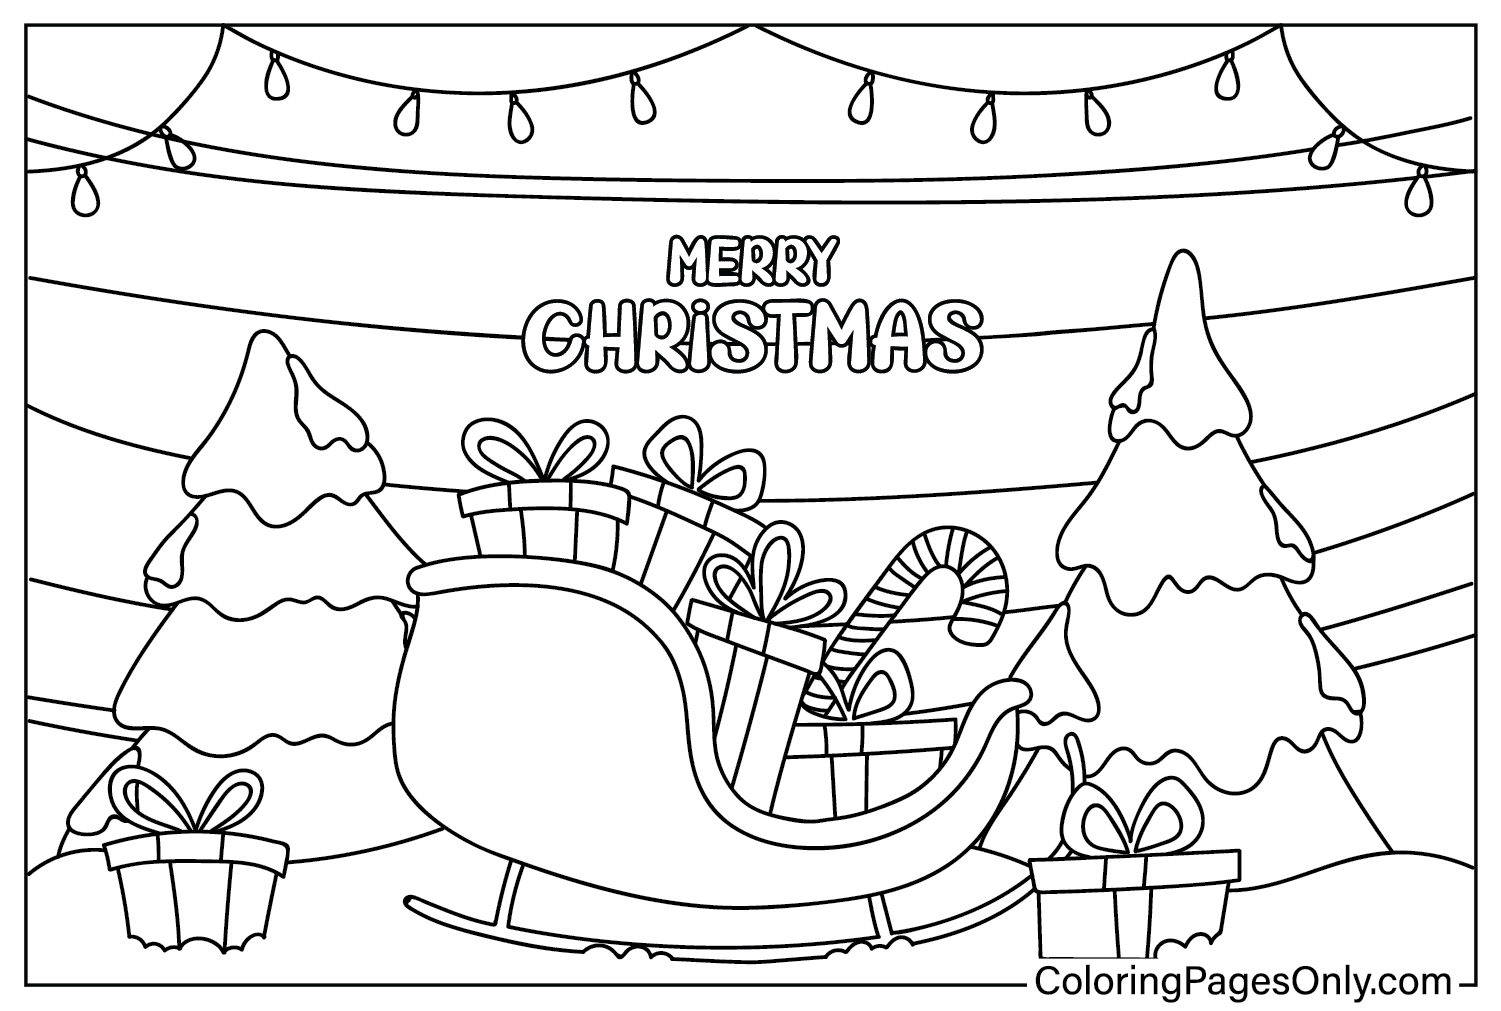 Christmas Background Coloring Page from Christmas Wallpaper